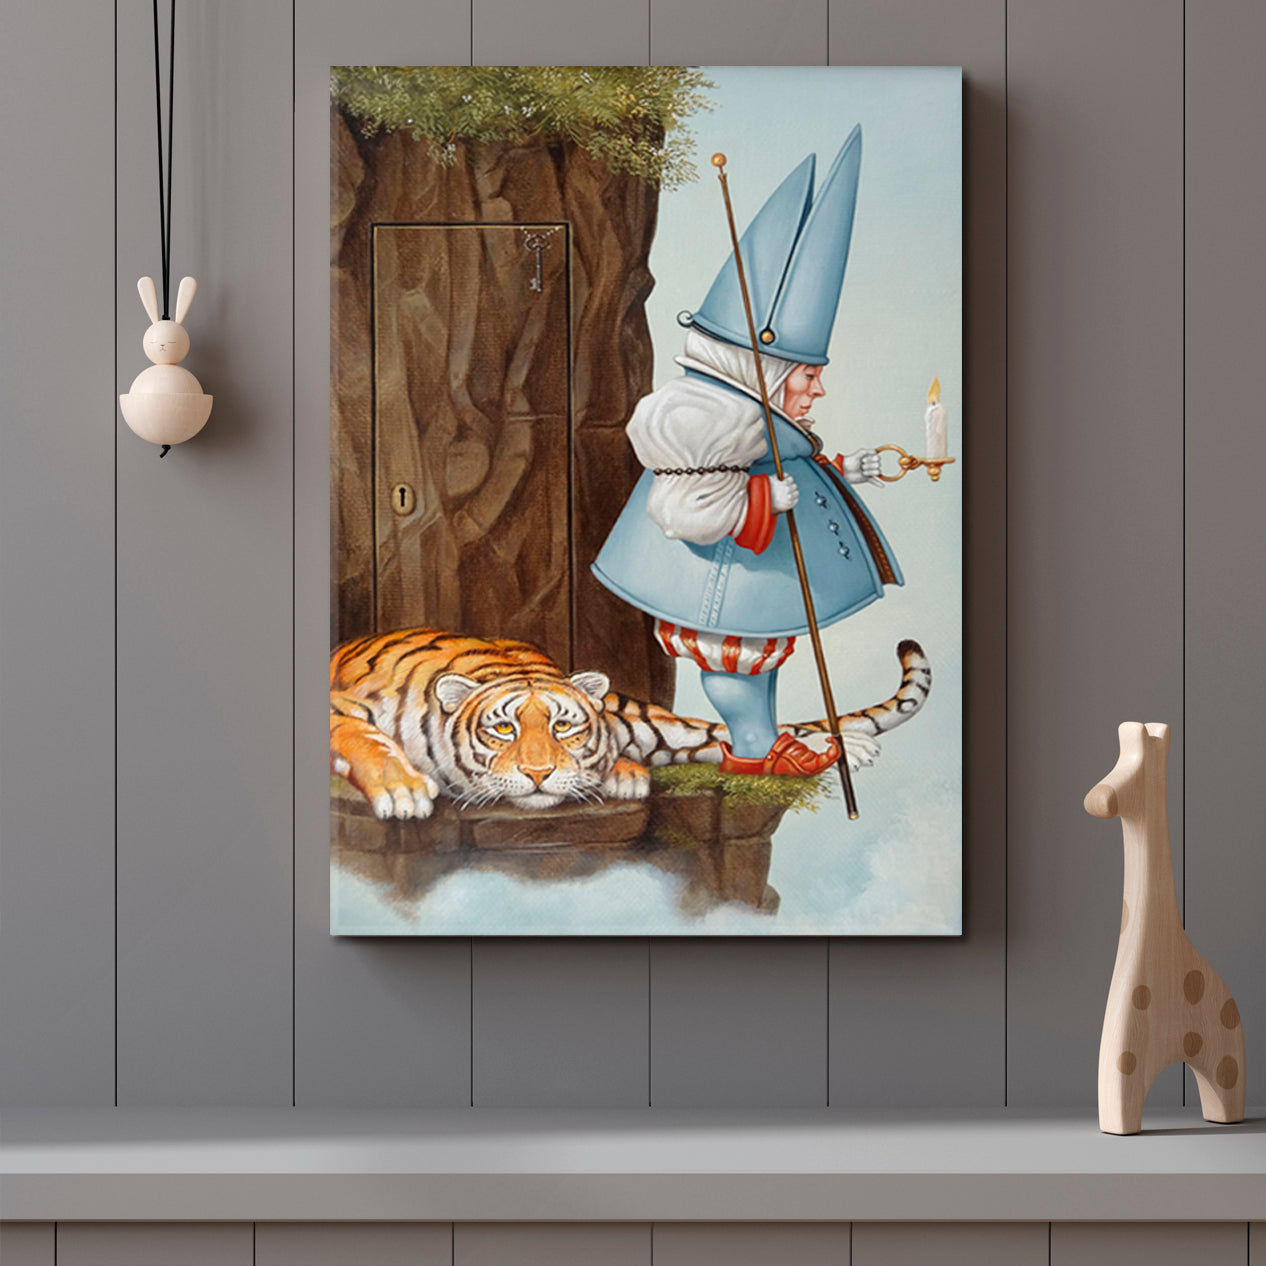 SECRET DOOR Gnome With Candle & Tiger Surrealistic Painting Surreal Fantasy Large Art Print Décor Artesty   